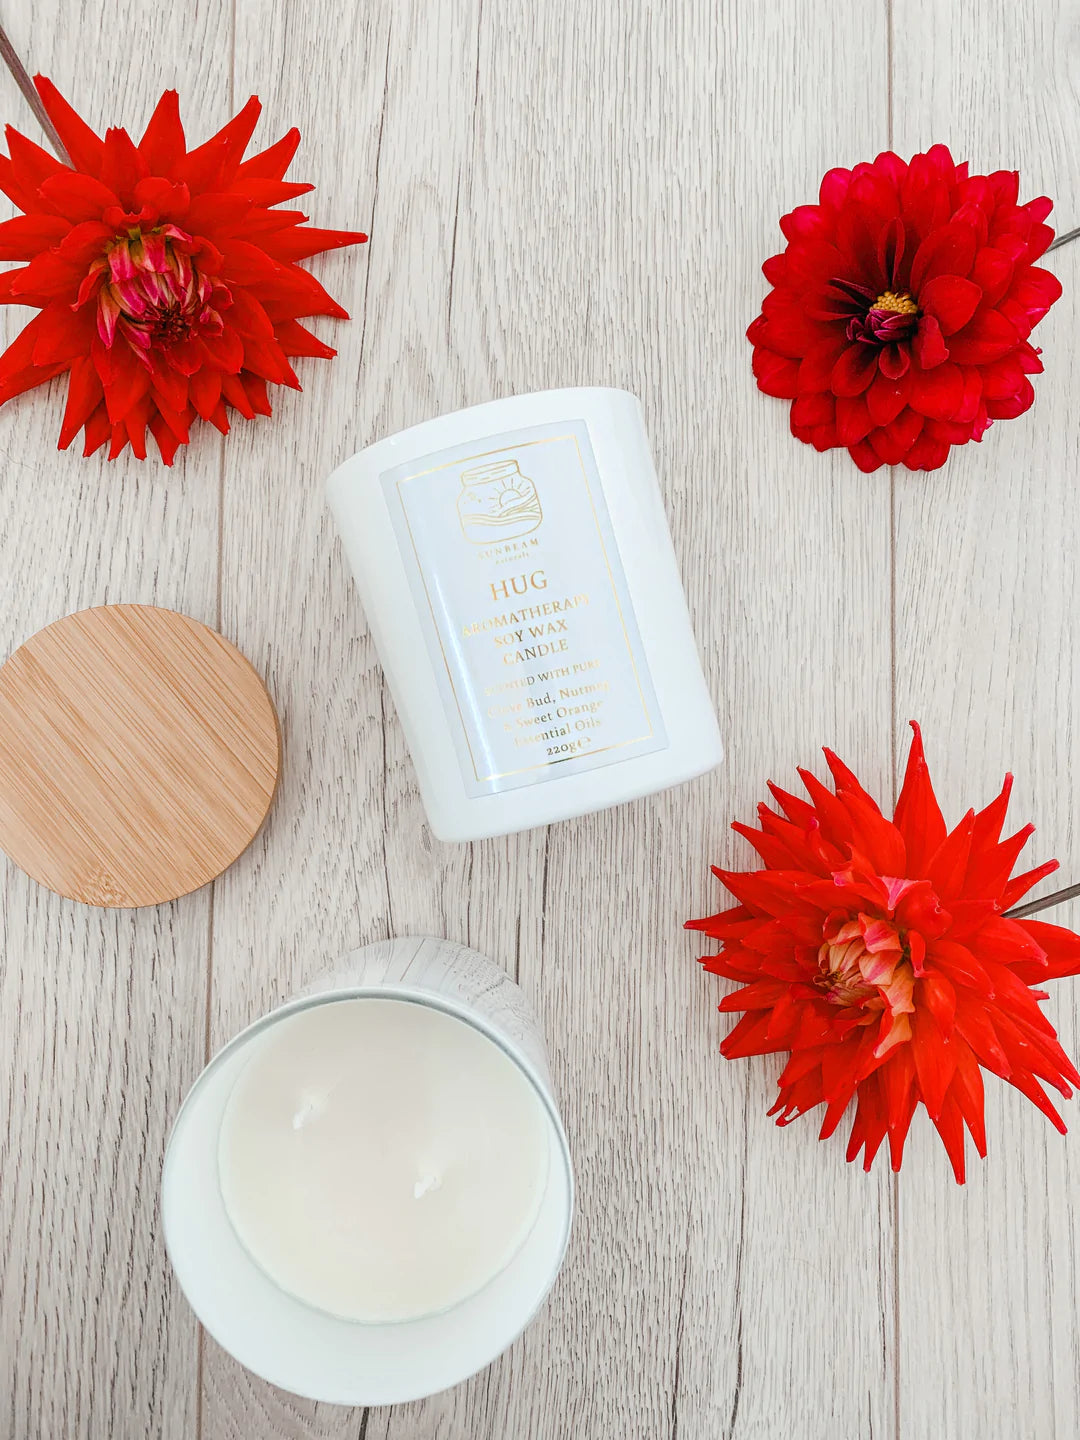 Deluxe Aromatherapy Candle | Hug Scent